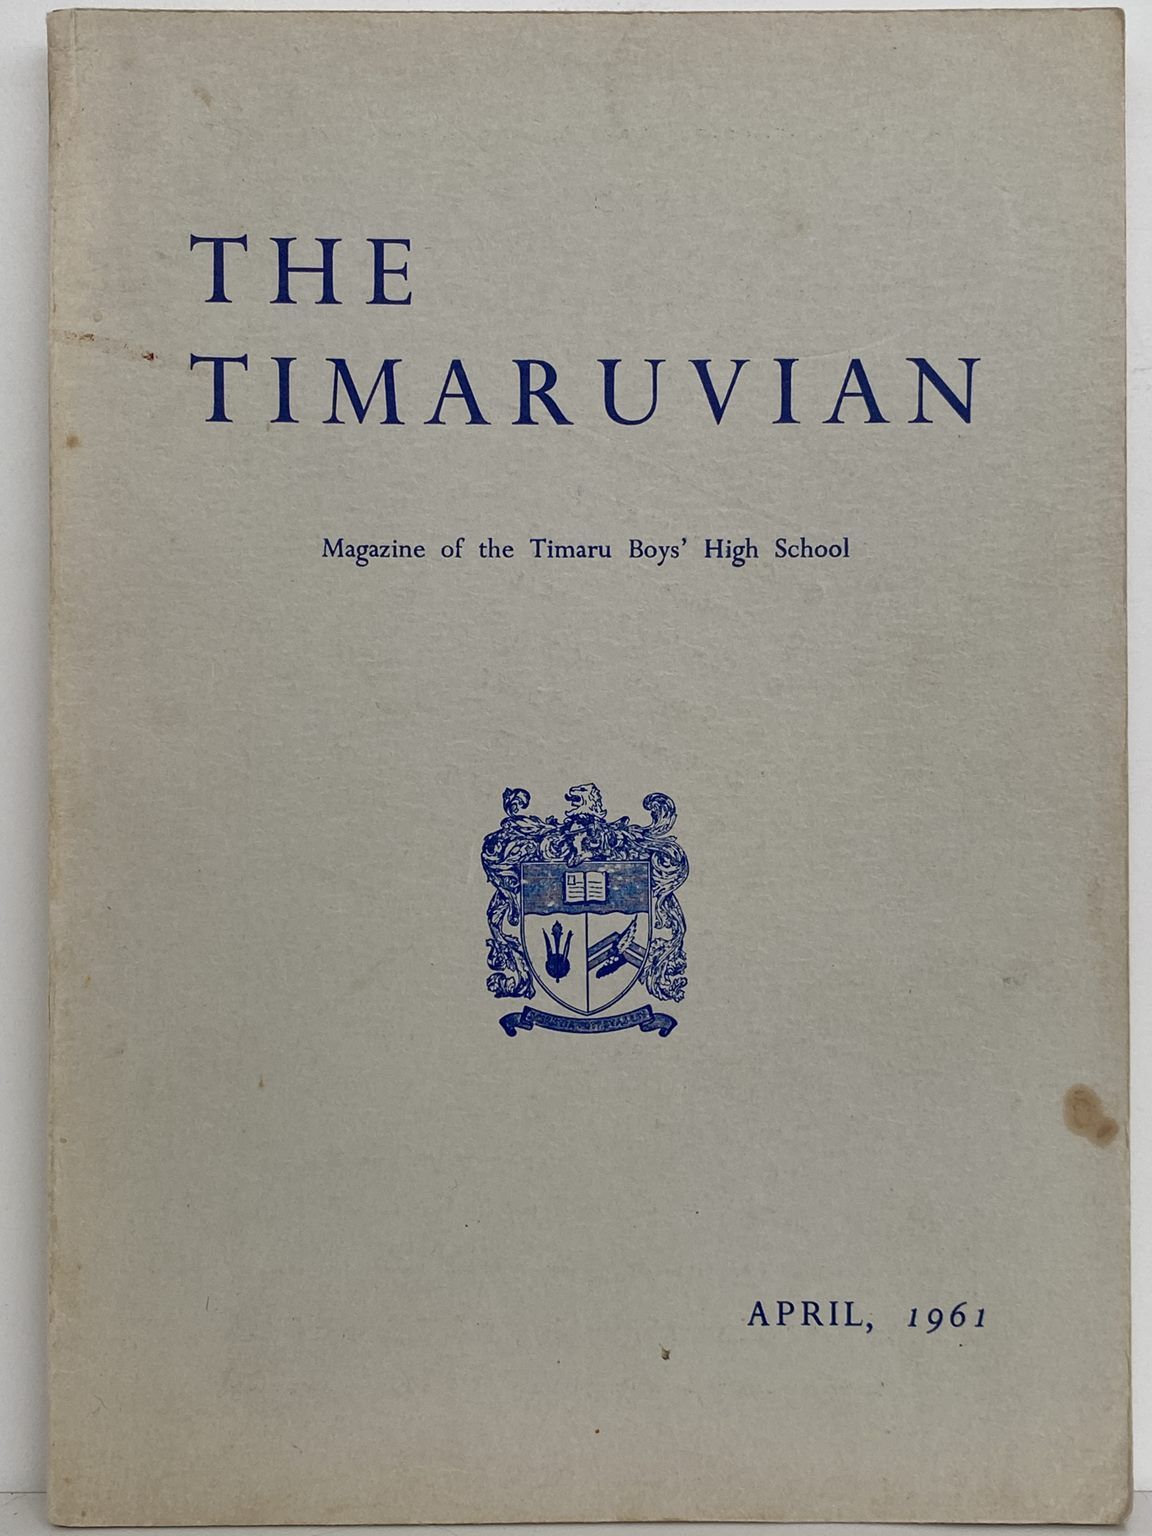 THE TIMARUVIAN: Magazine of the Timaru Boys' High School and its Old Boys' Association 1961